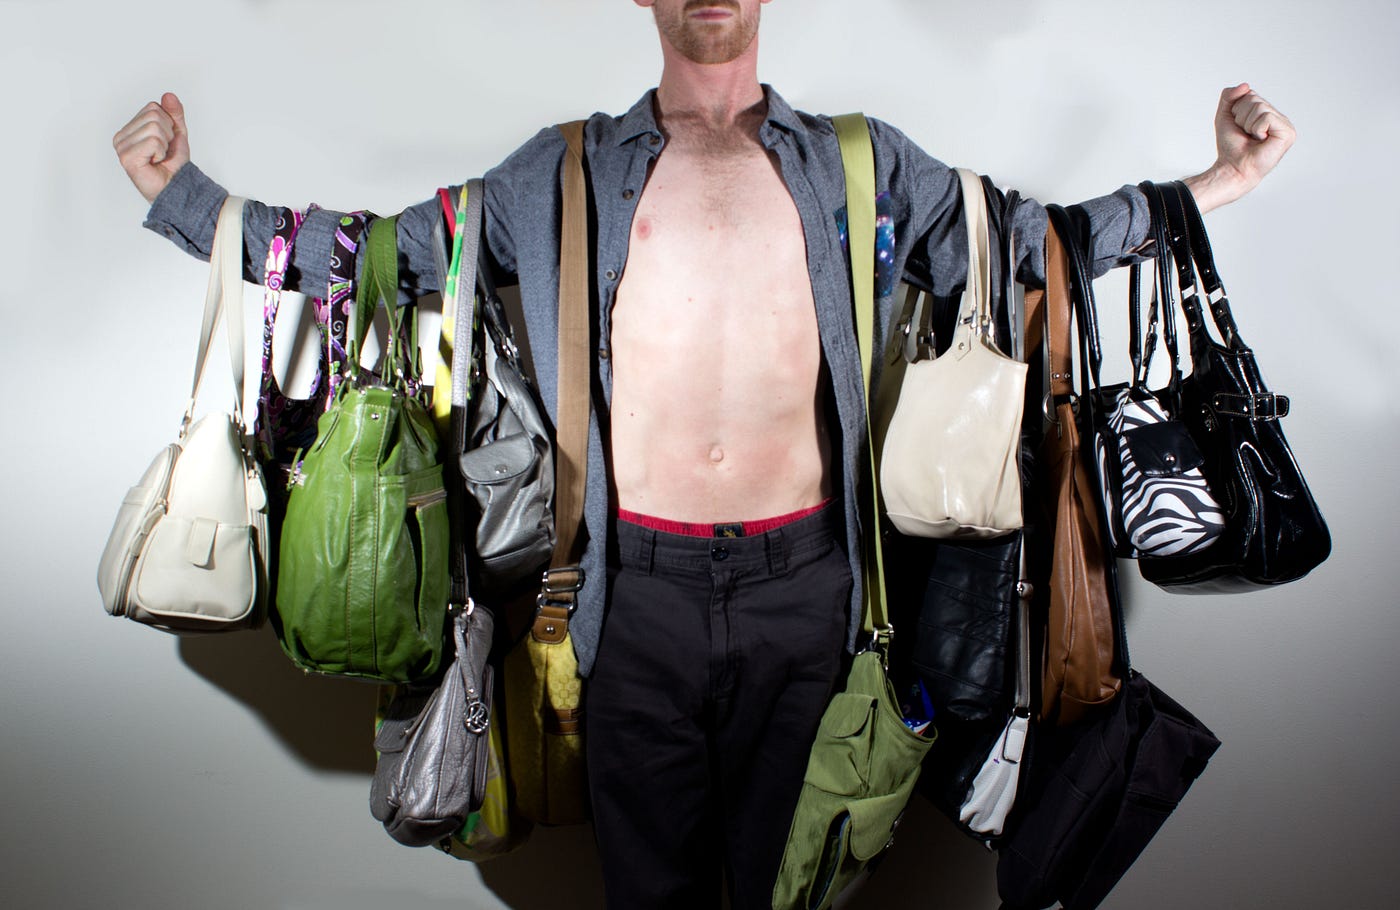 11 Things I Learned While Photographing “Men with Purses” | by Samantha  Ogletree | Medium